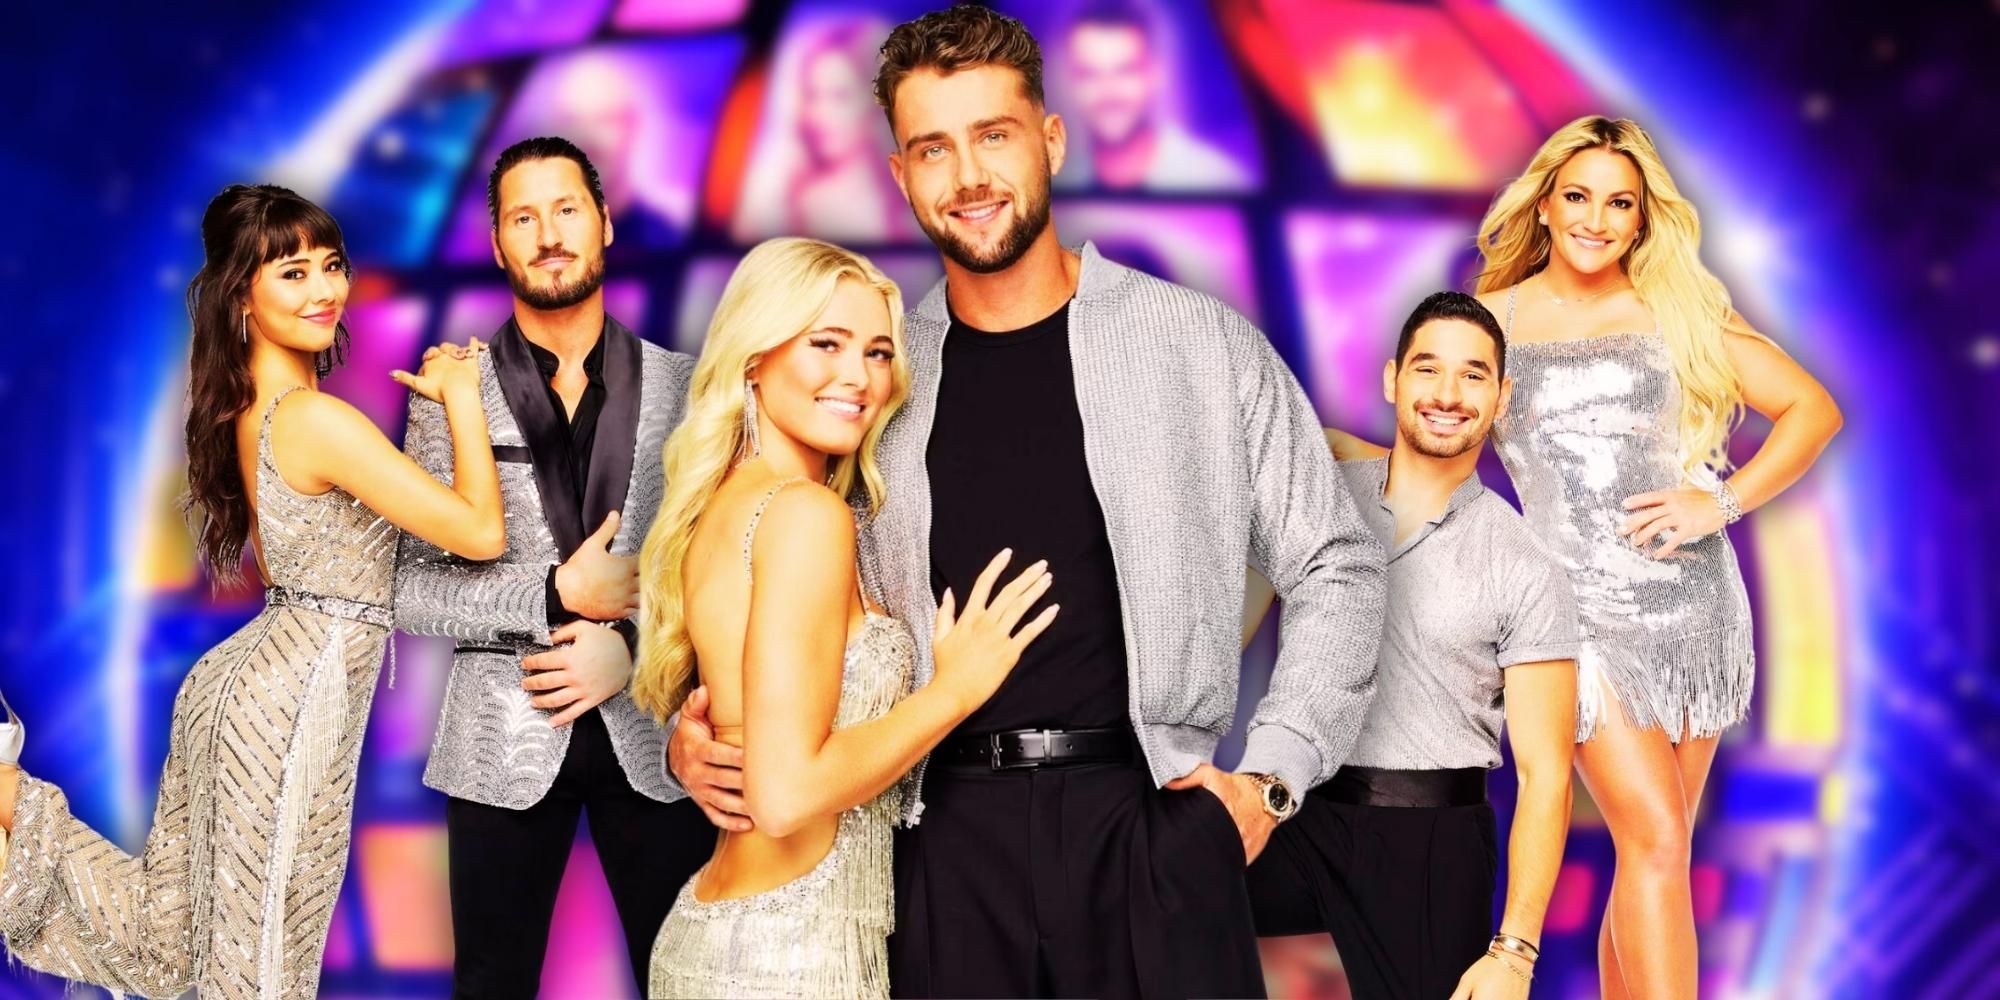 Dancing With The Stars Season 32 cast members Xochitl Gomez & Val Chmerkovskiy, Harry Jowsey & Rylee Arnold, and Jamie Lynn Spears & Alan Bersten posing together